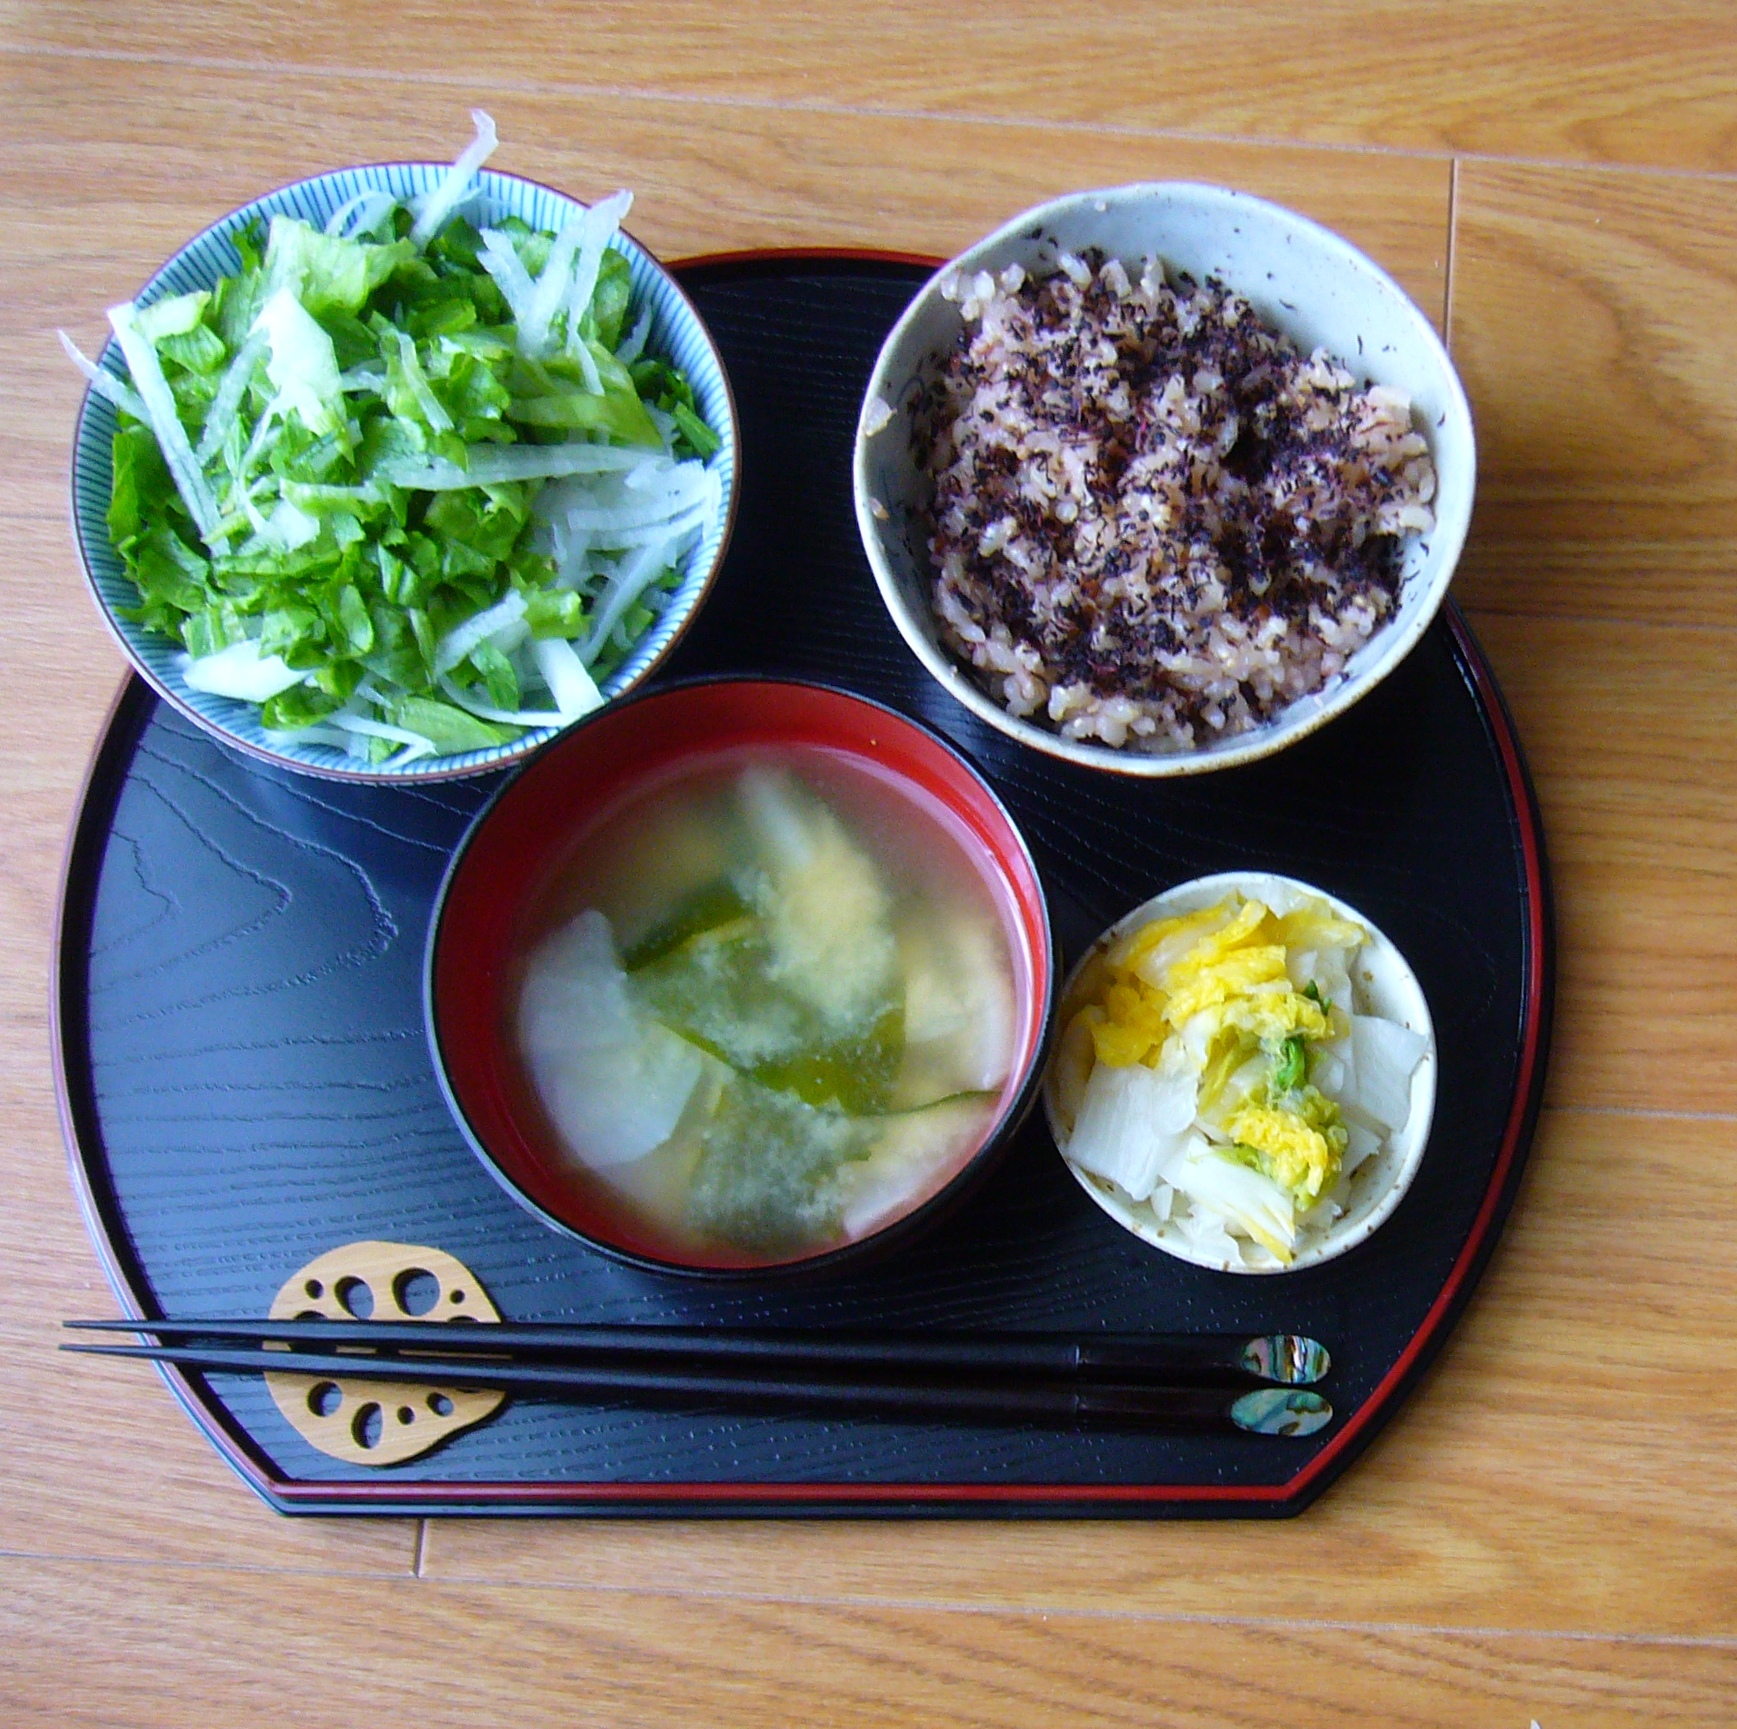 Homecooking: miso soup | The Japans